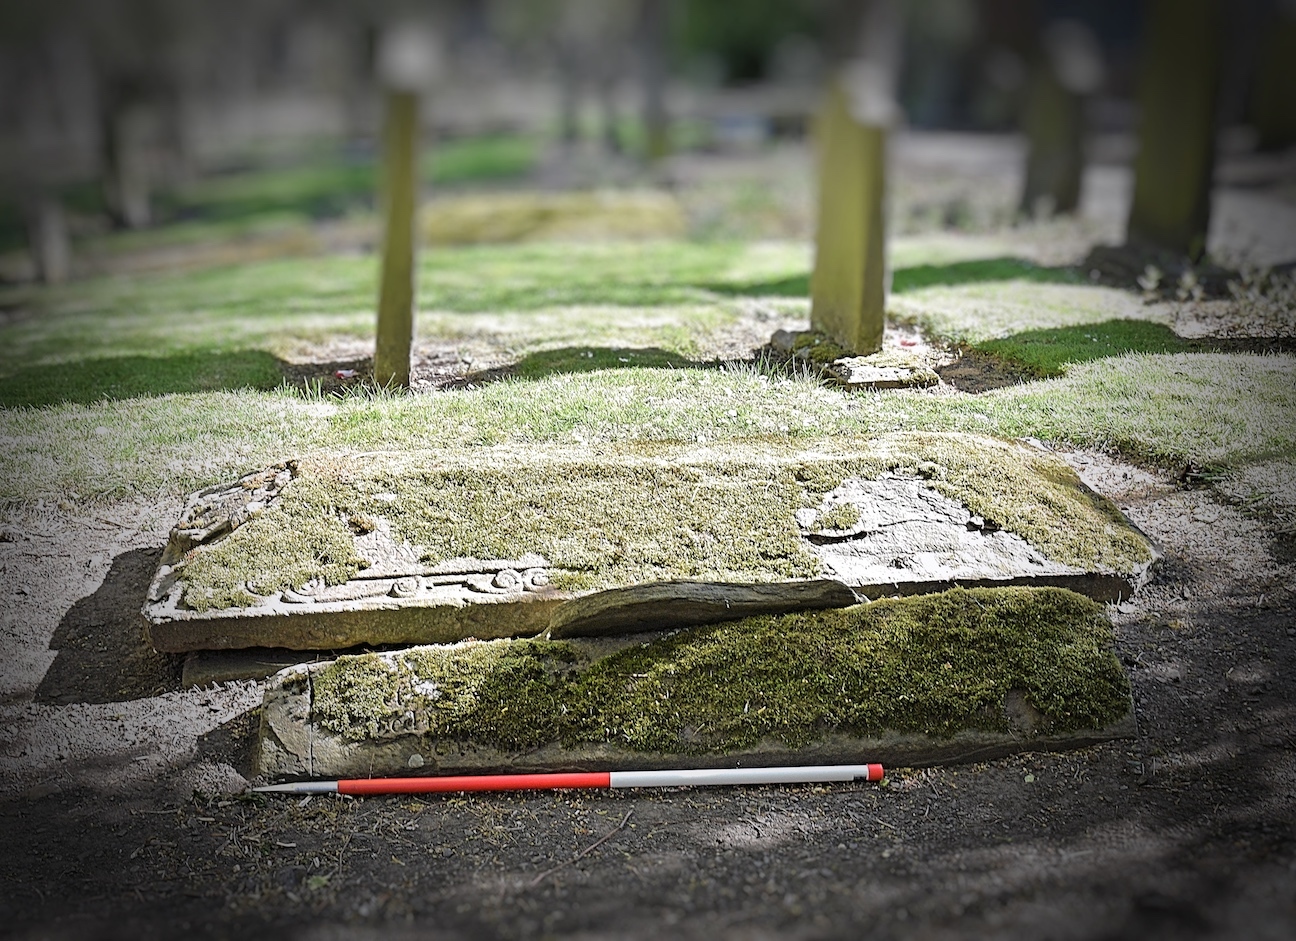 The stone was found during digital mapping of the cemetery in July